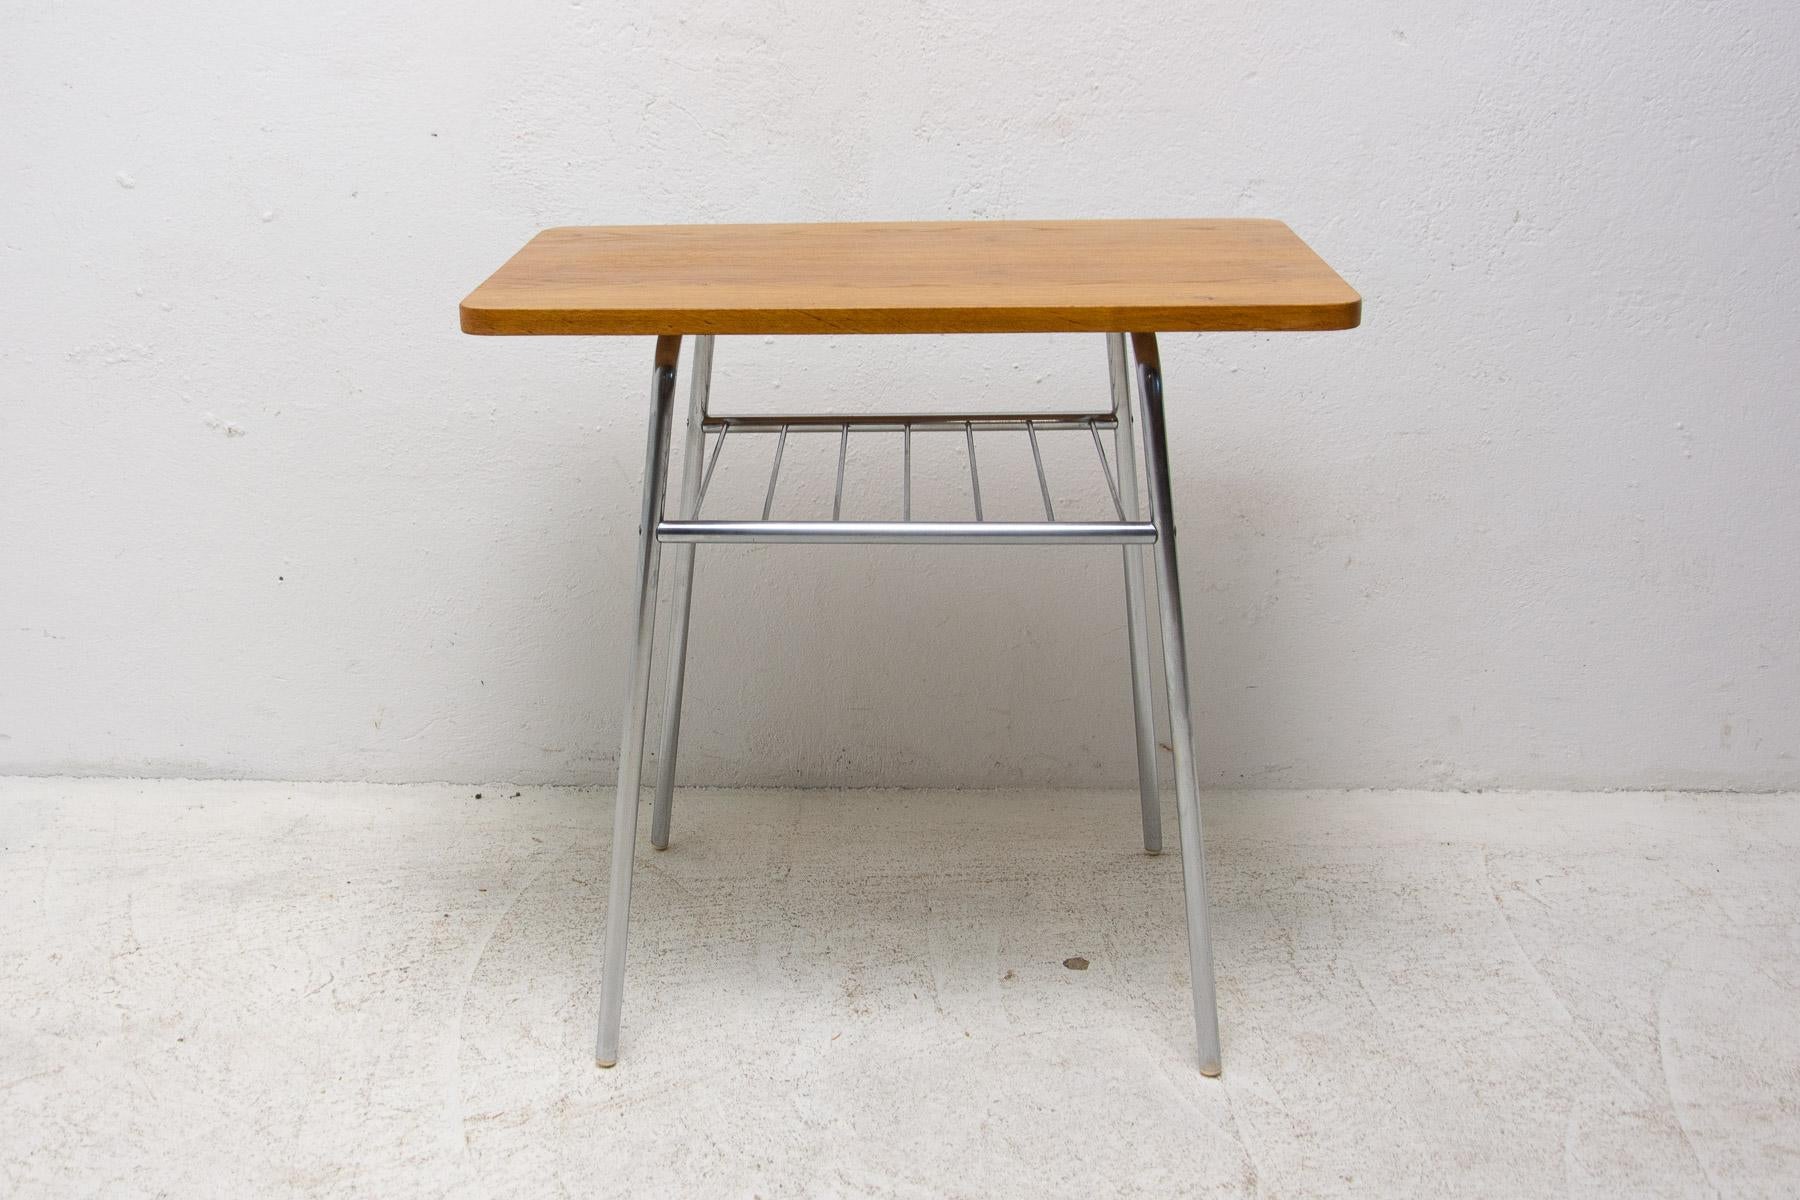 Fully Renovated Chrome and Wood Side Table, 1950s, Czechoslovakia For Sale 5